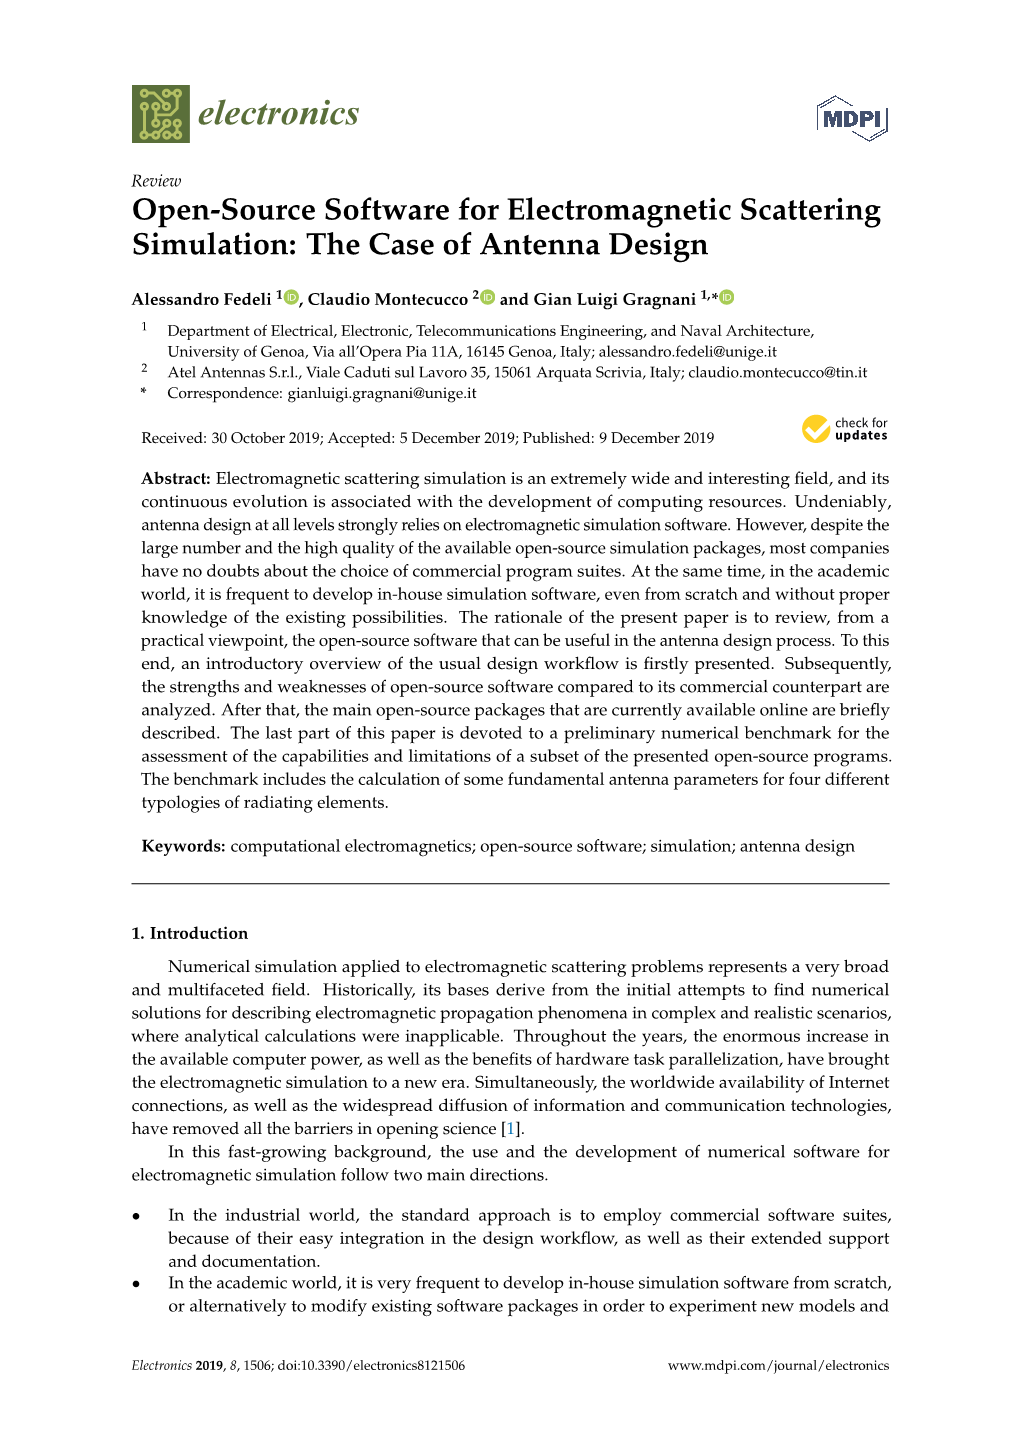 Open-Source Software for Electromagnetic Scattering Simulation: the Case of Antenna Design